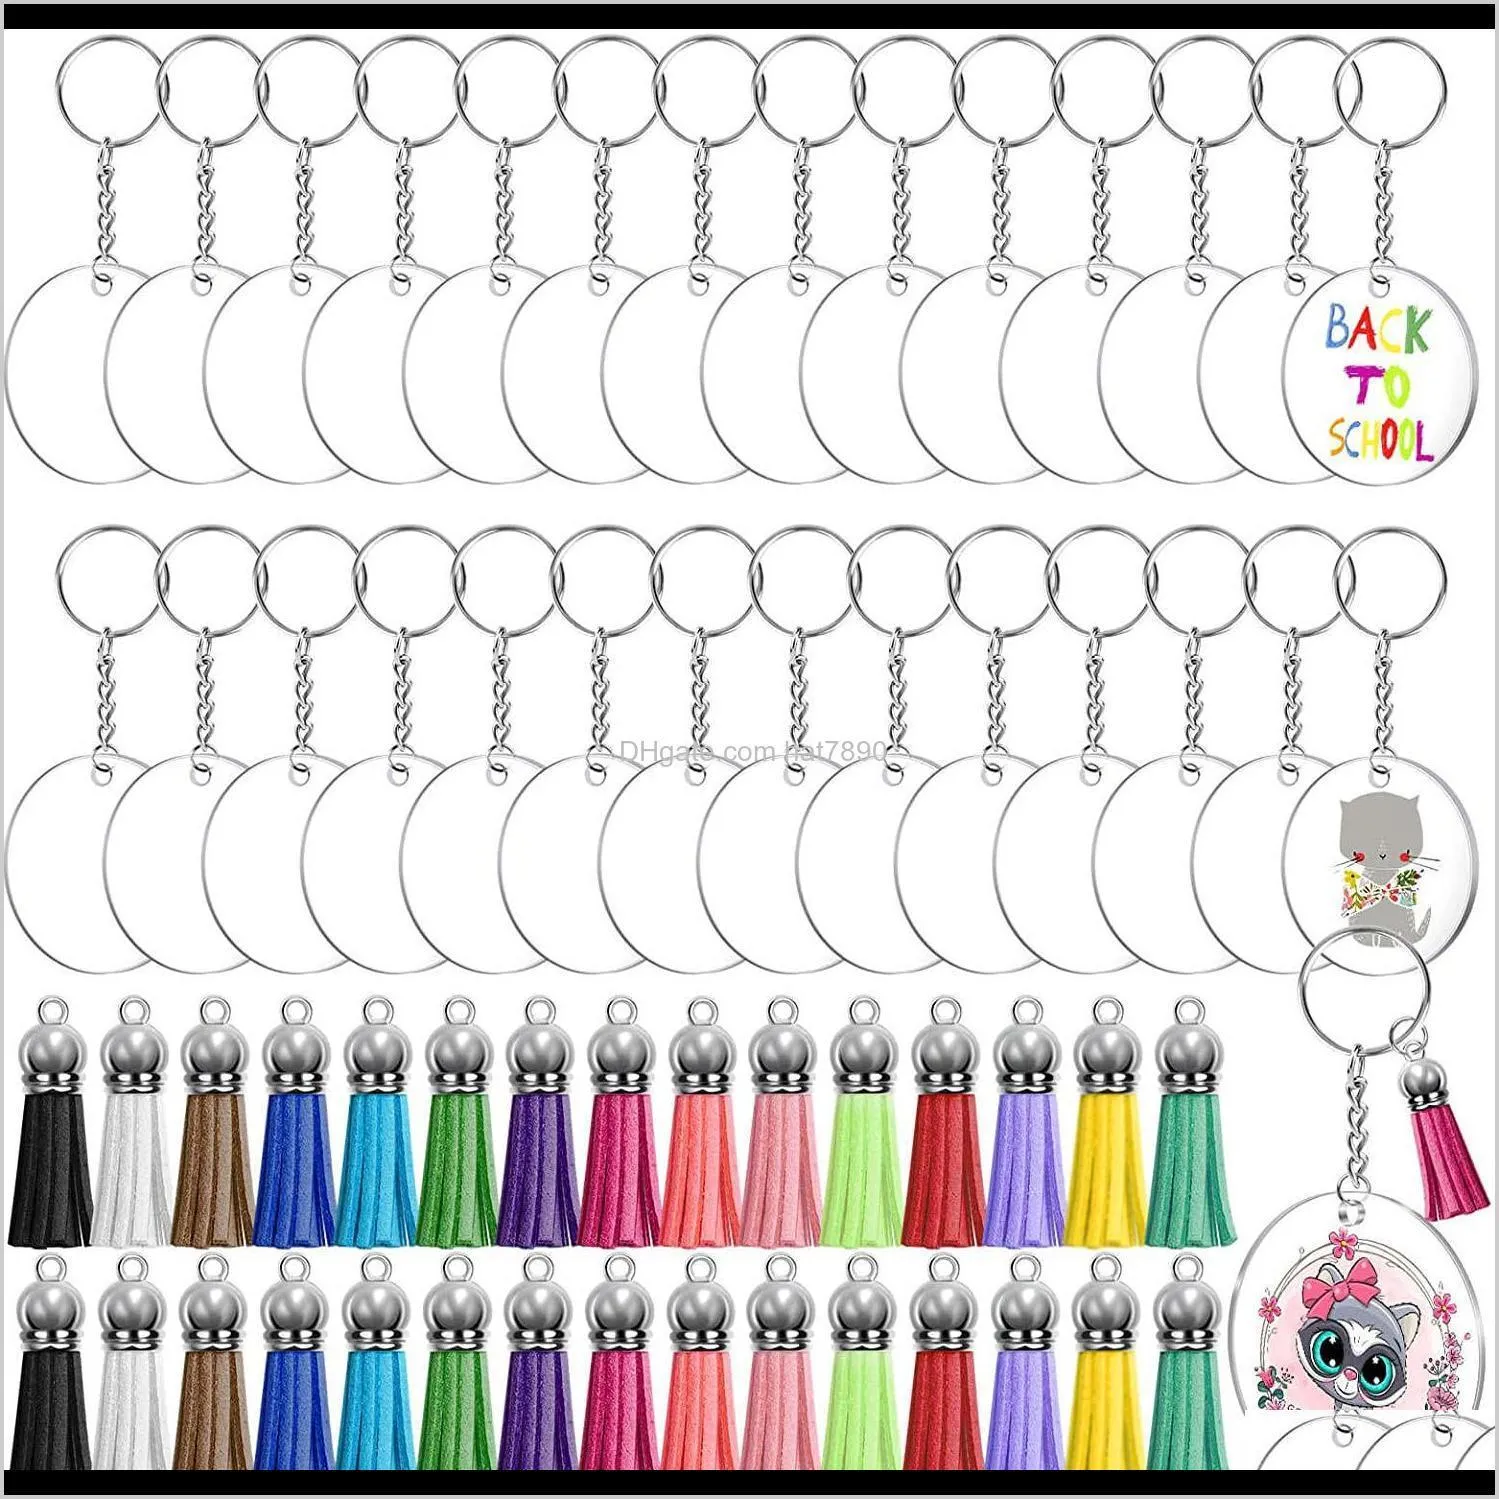 Kimter Key Rings 120Pcs Keychain Blank Acrylic Clear Circle Discs with Hole Colorful Tassel Keyring for DIY Projects Craft Supplies